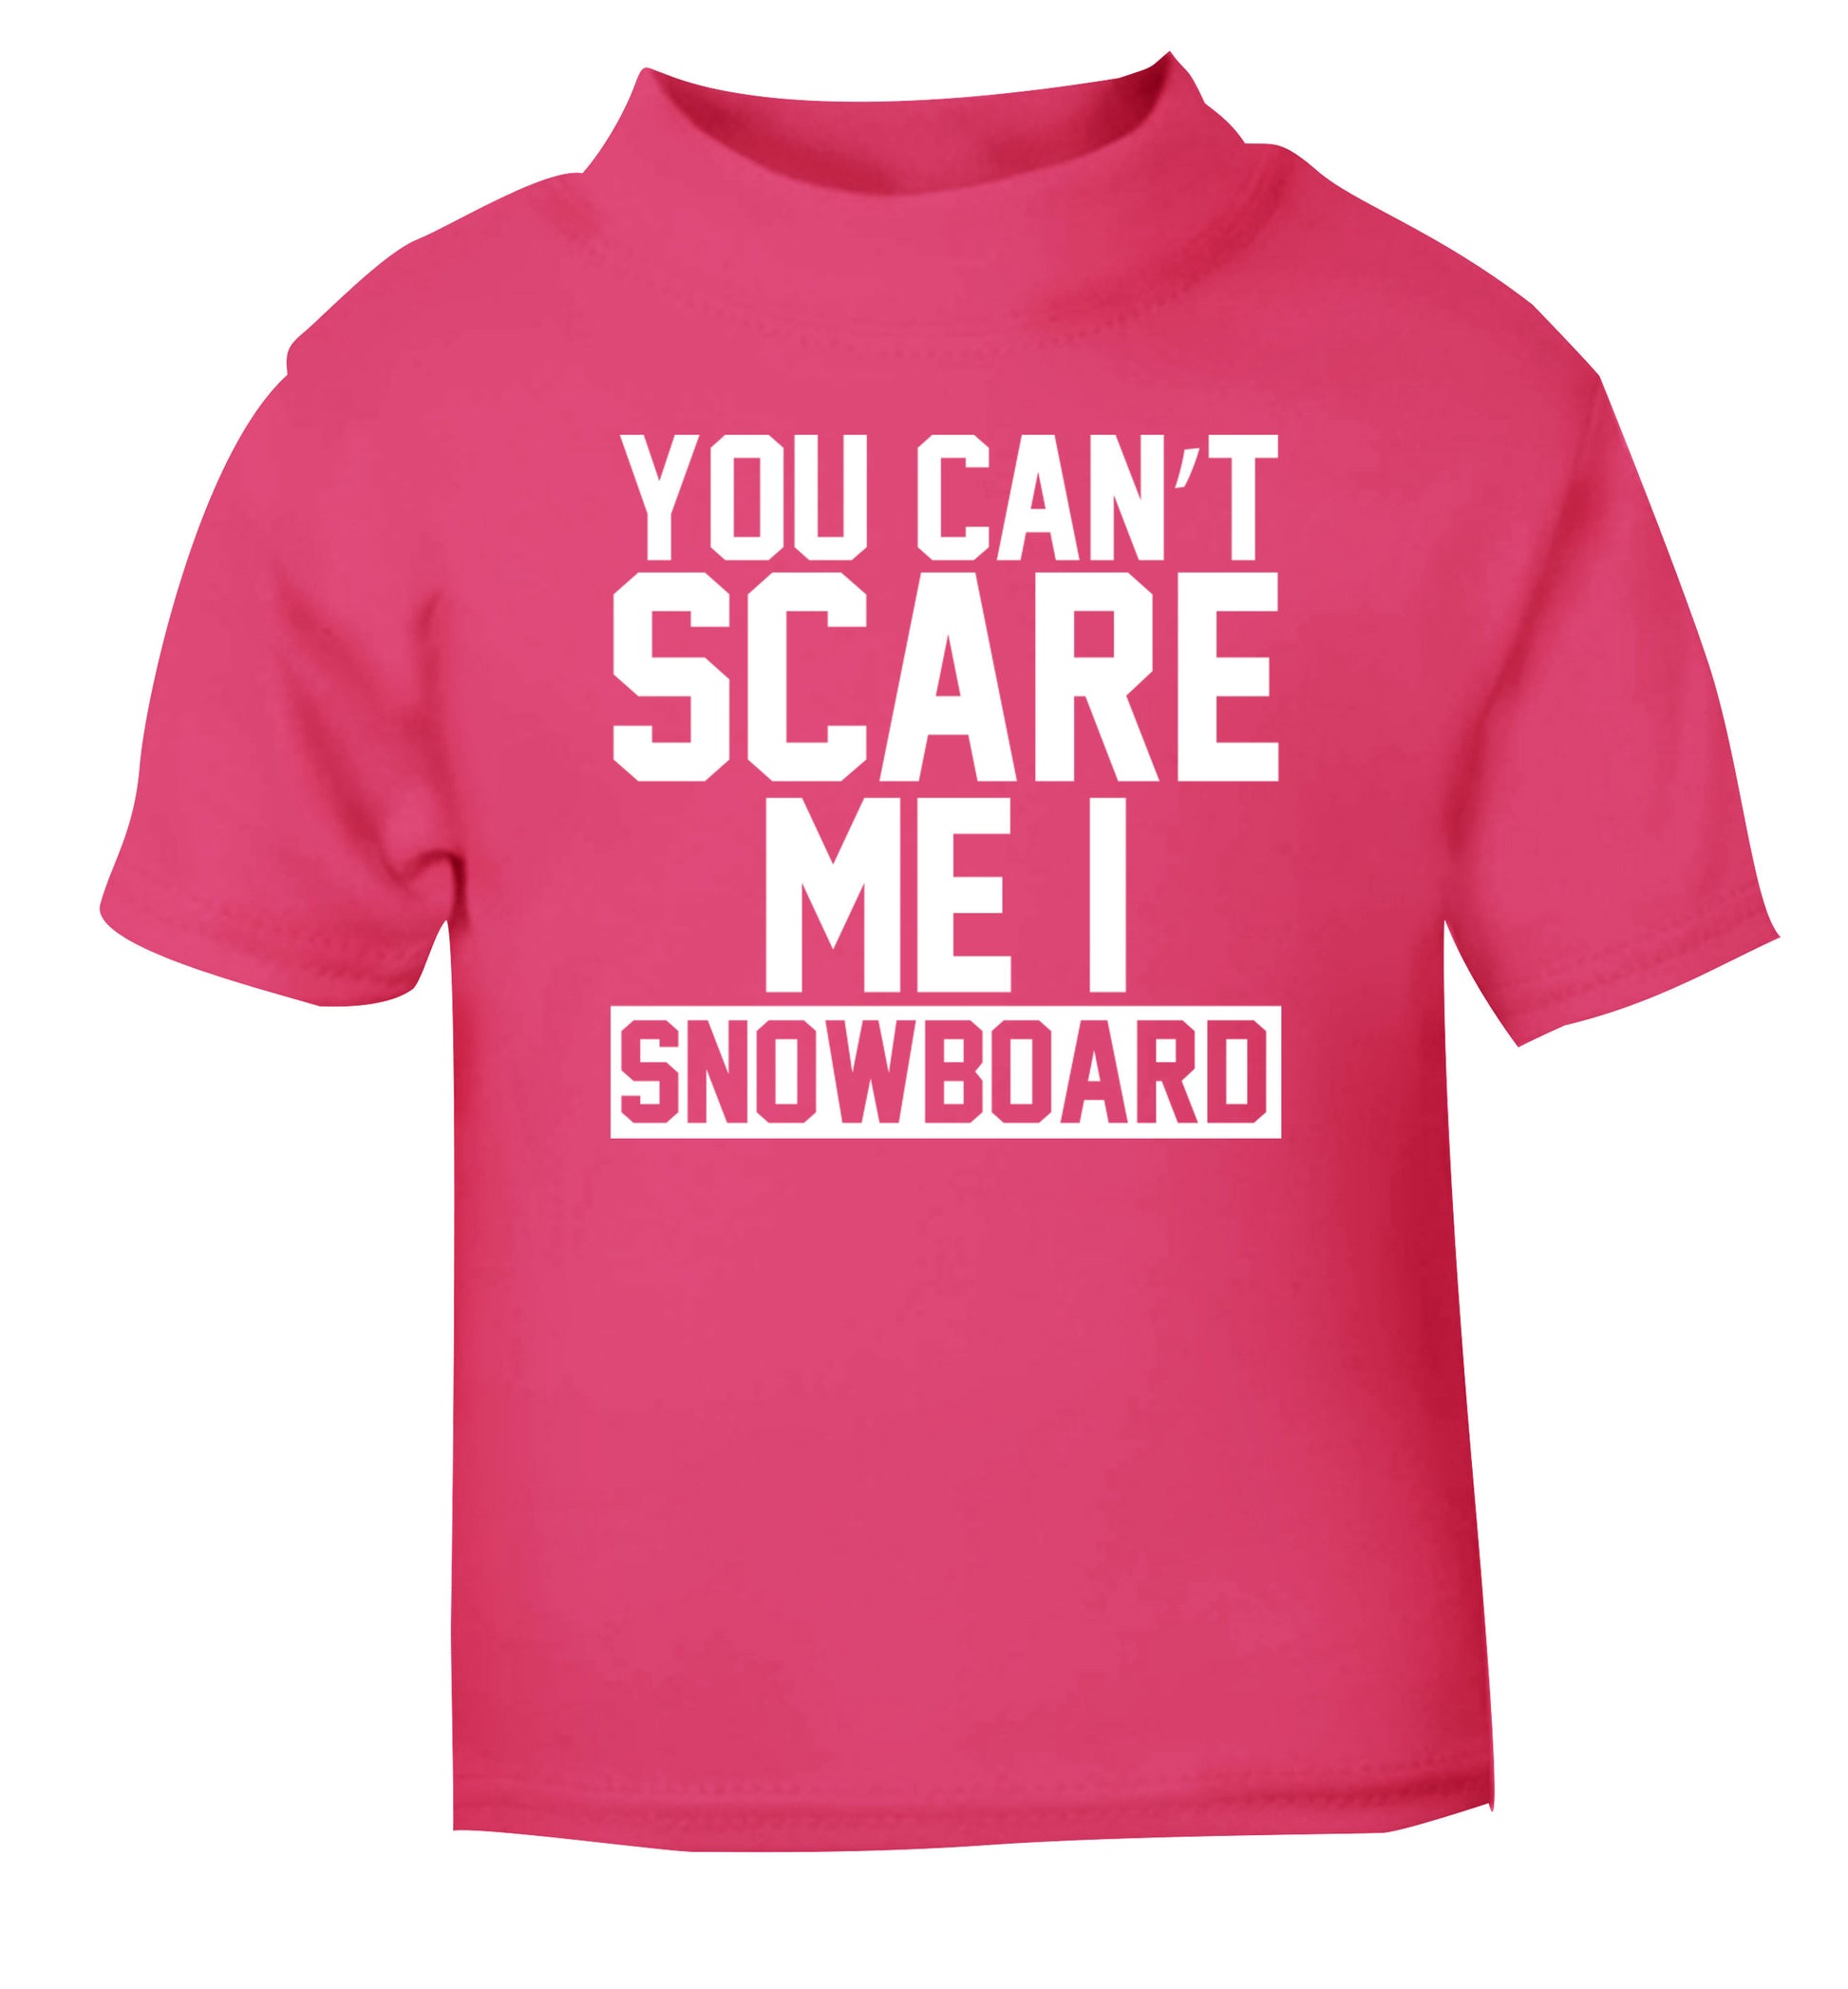 You can't scare me I snowboard pink Baby Toddler Tshirt 2 Years